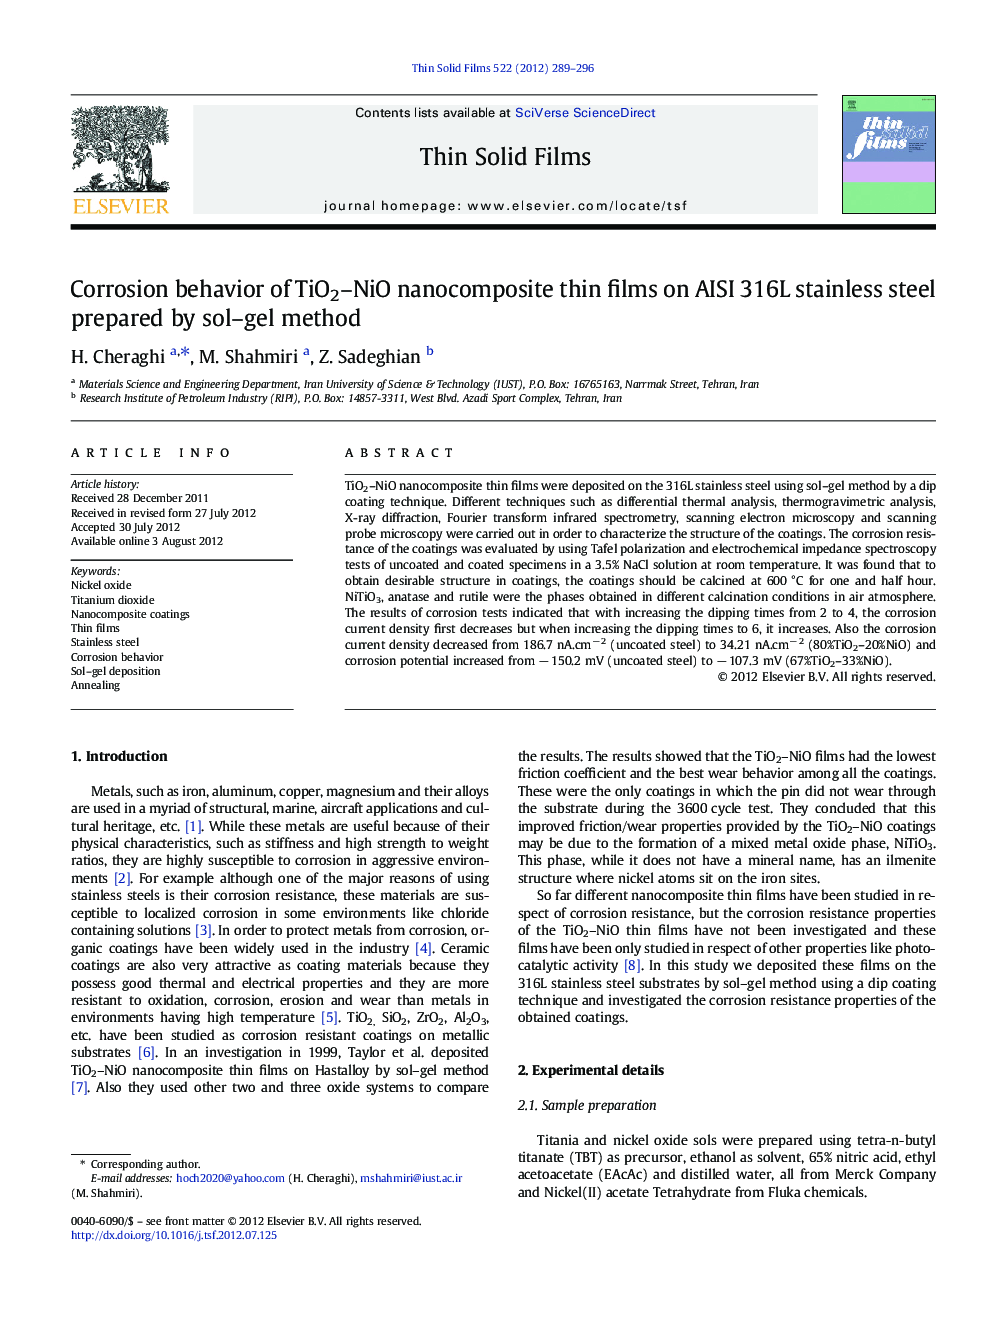 Corrosion behavior of TiO2–NiO nanocomposite thin films on AISI 316L stainless steel prepared by sol–gel method